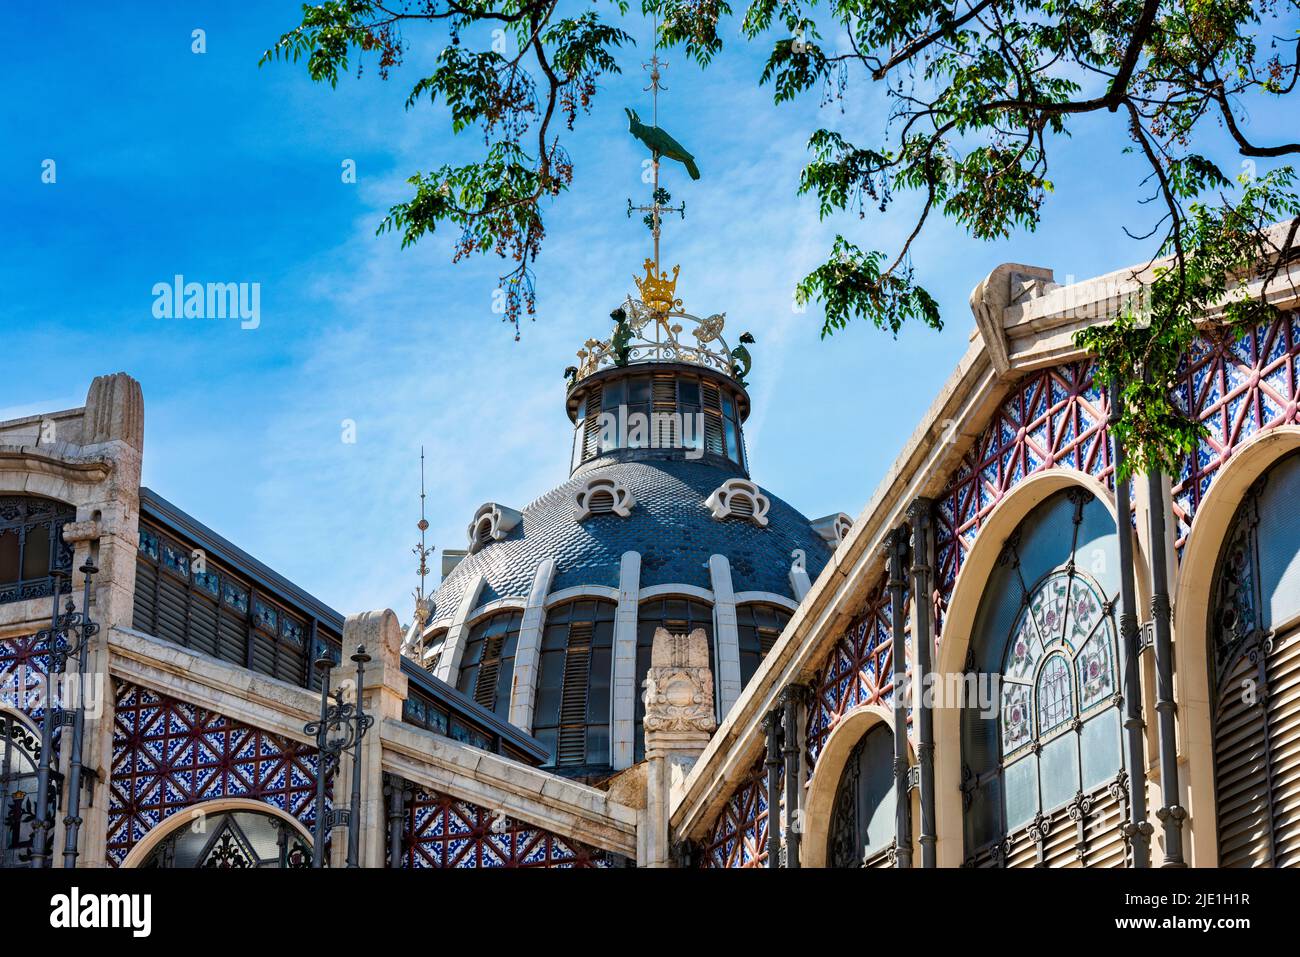 The dome and windows of the Central Market of Valencia in Spain Stock Photo